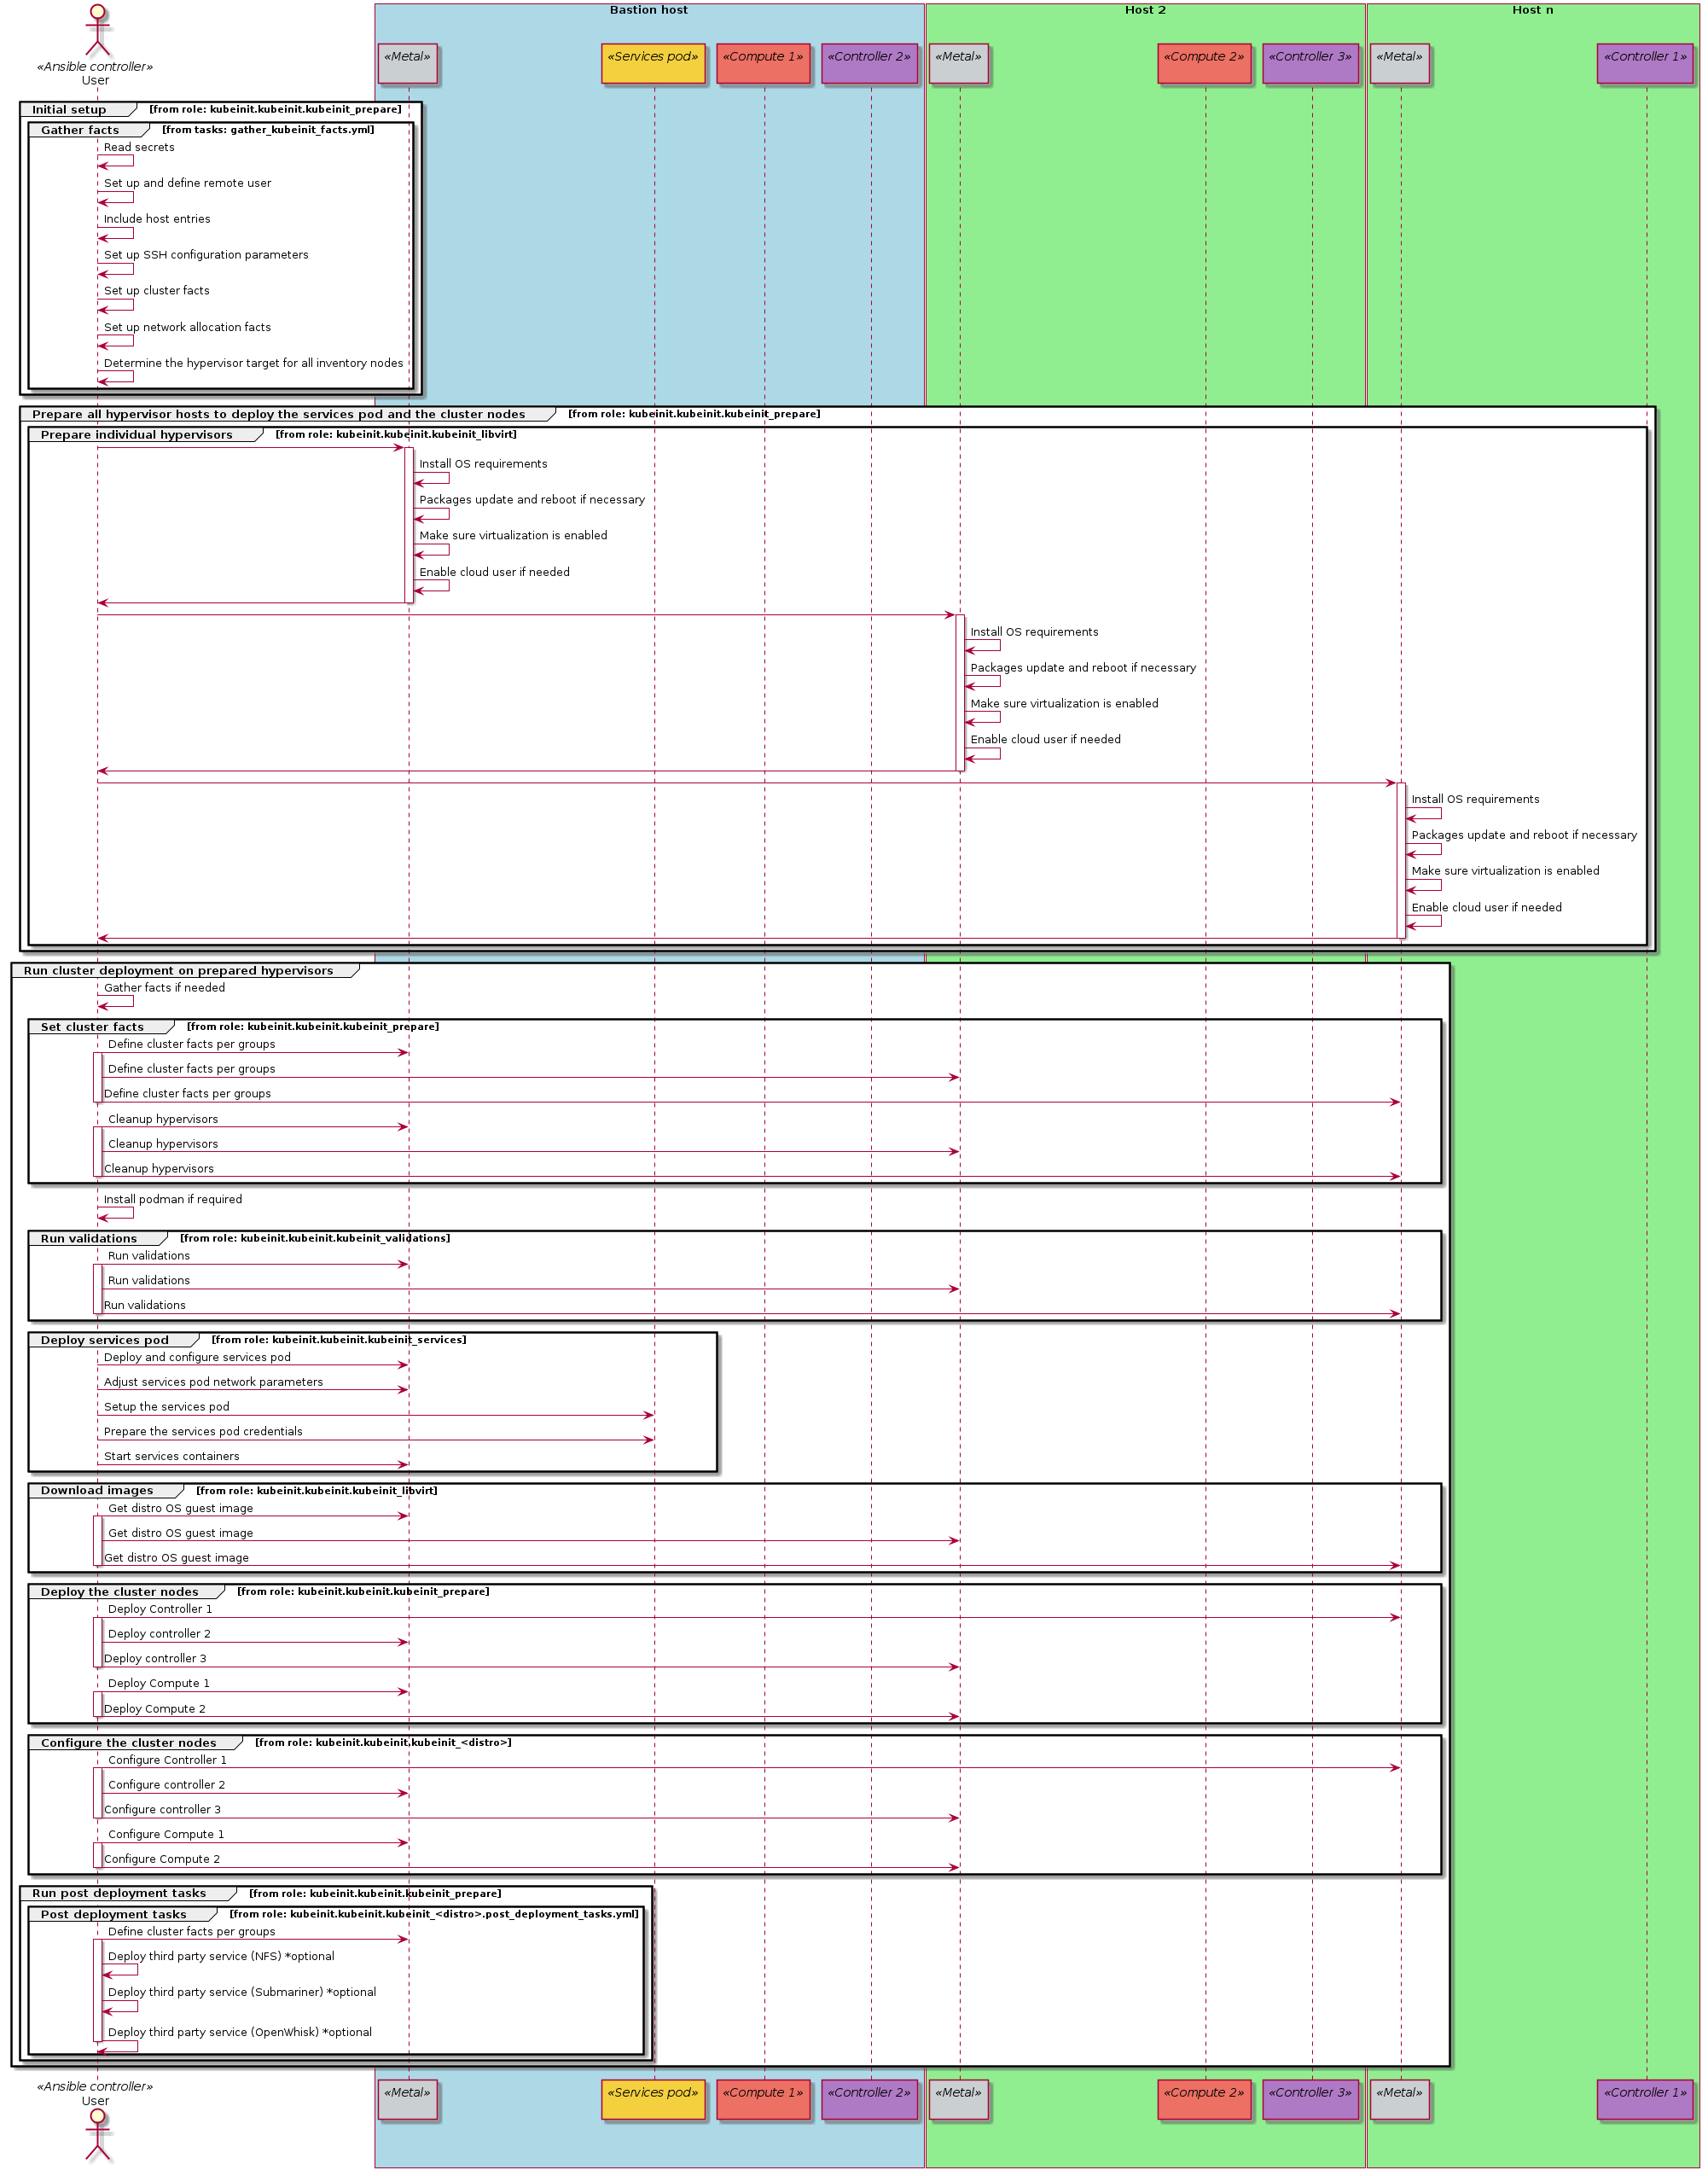 Sequence diagram of an Ansible deployment